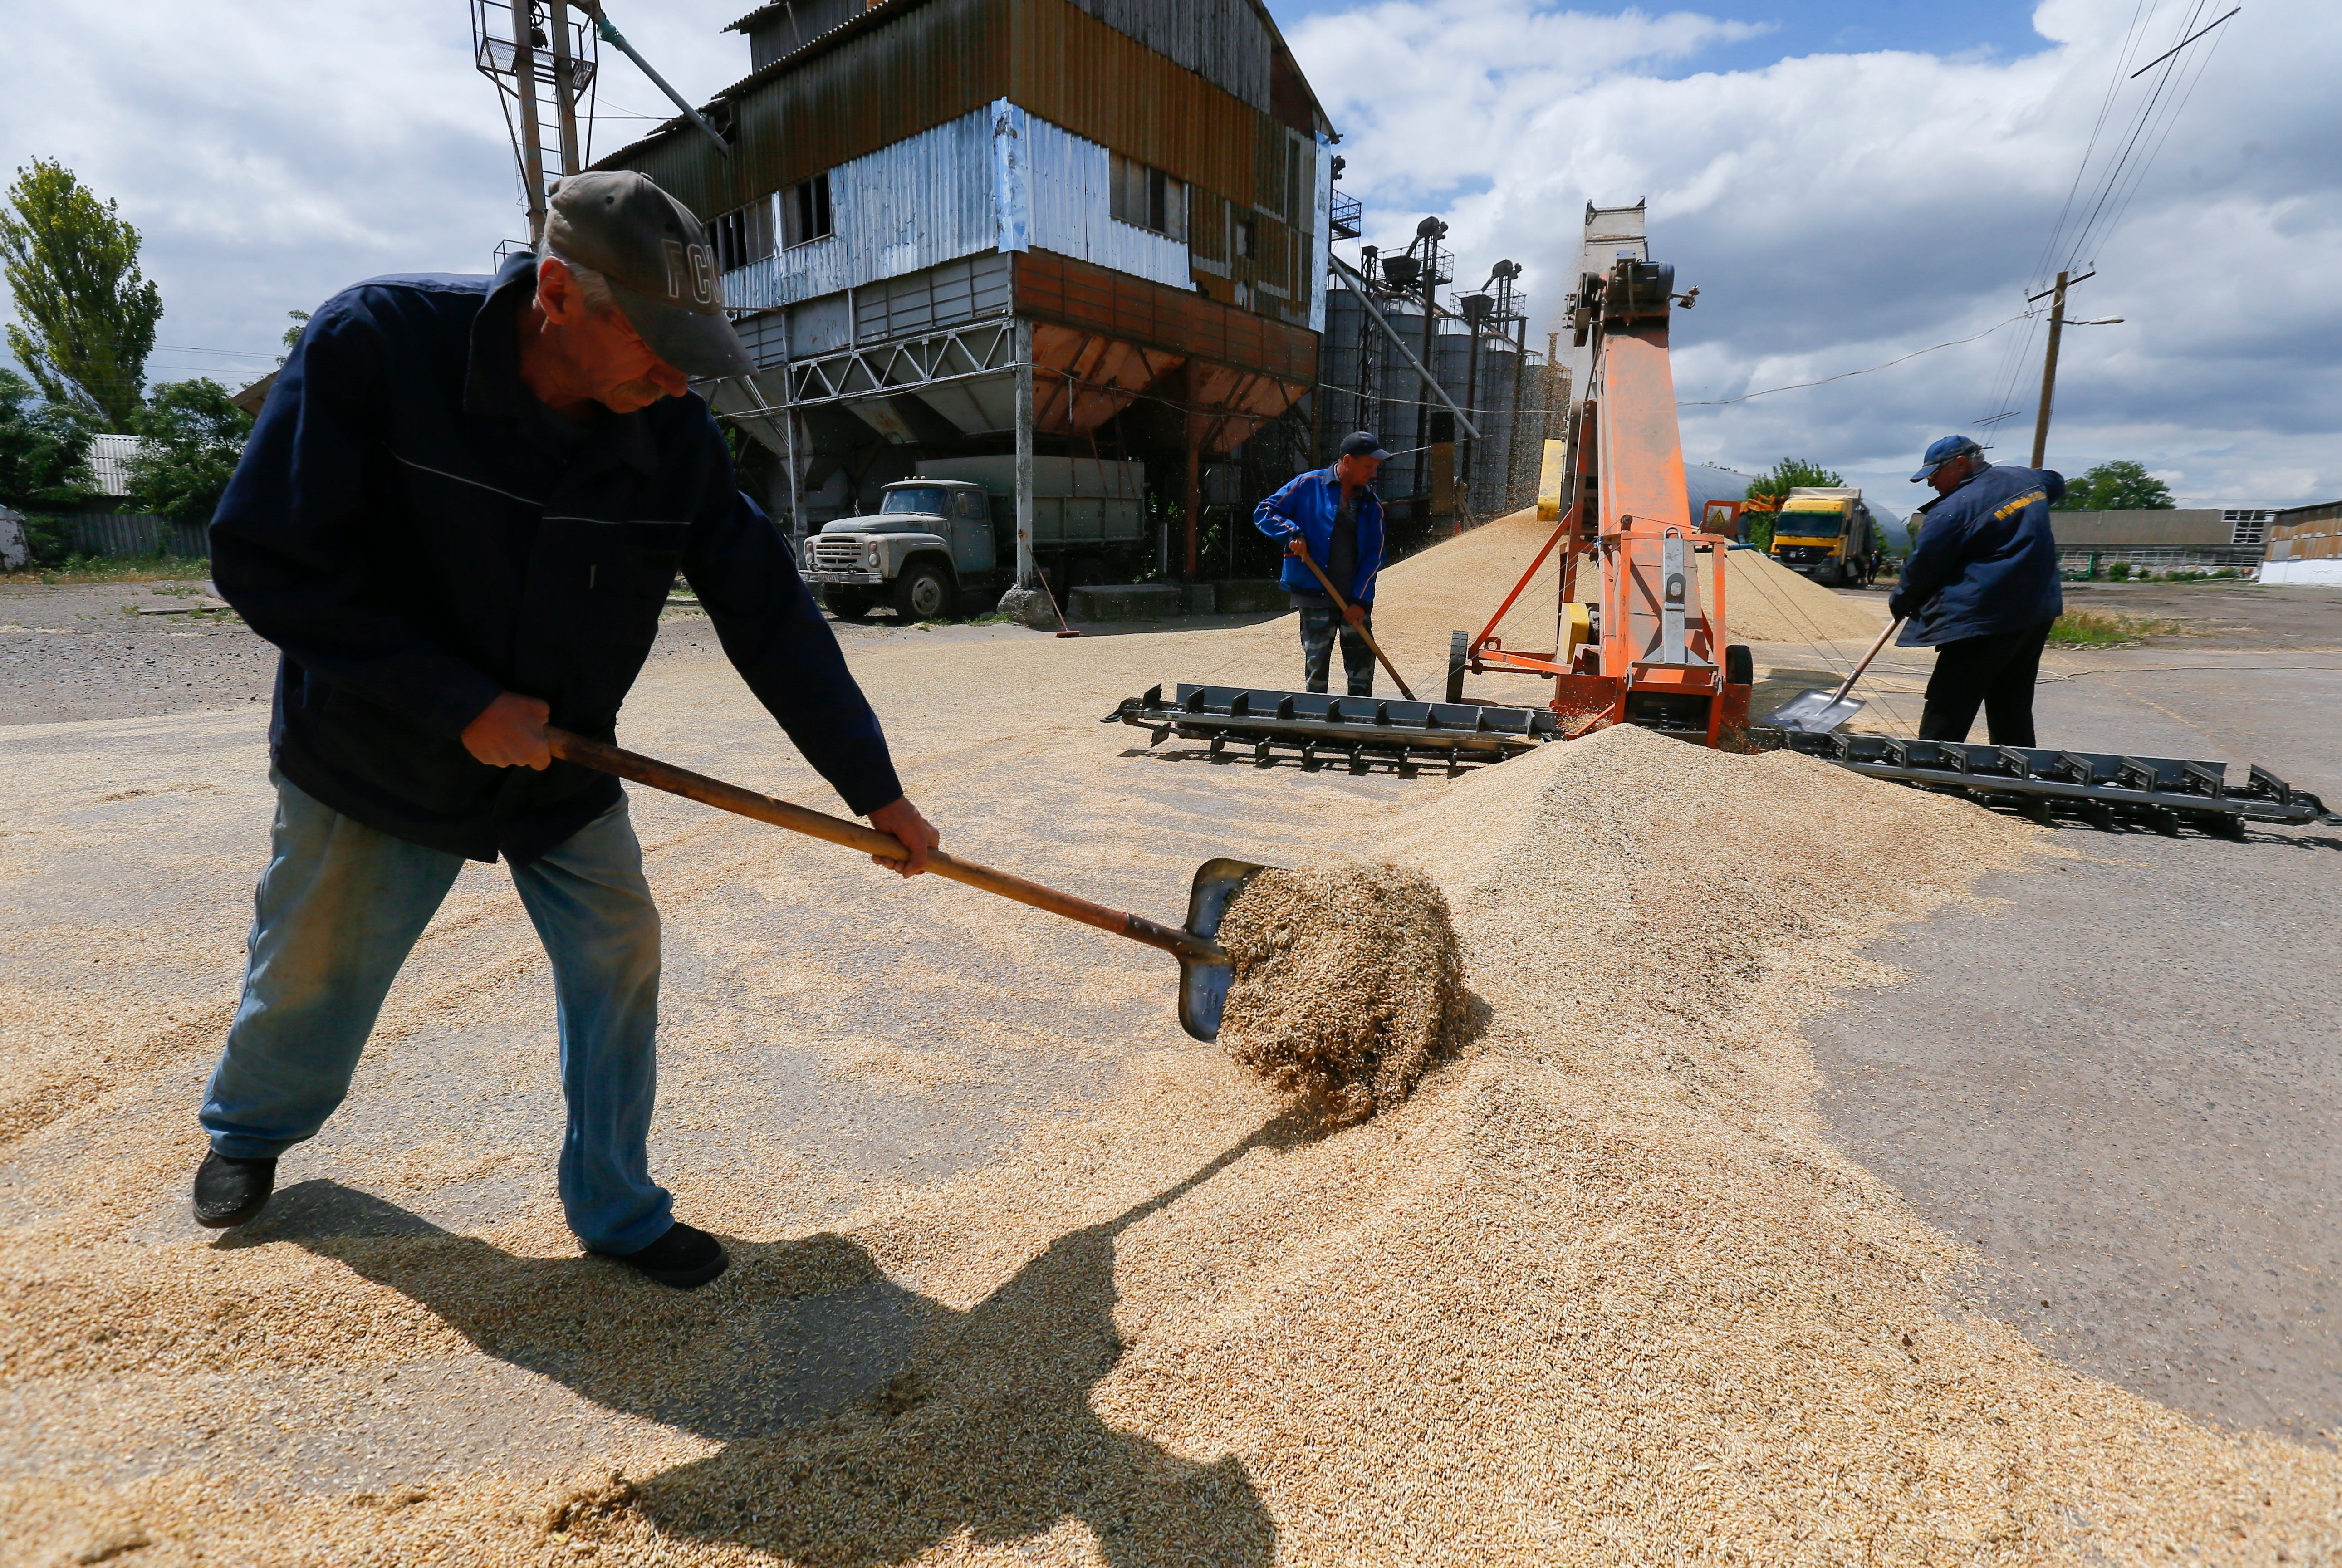 Ukrainian farmers mix grain of barley and wheat after the harvesting of crops in Odesa last week